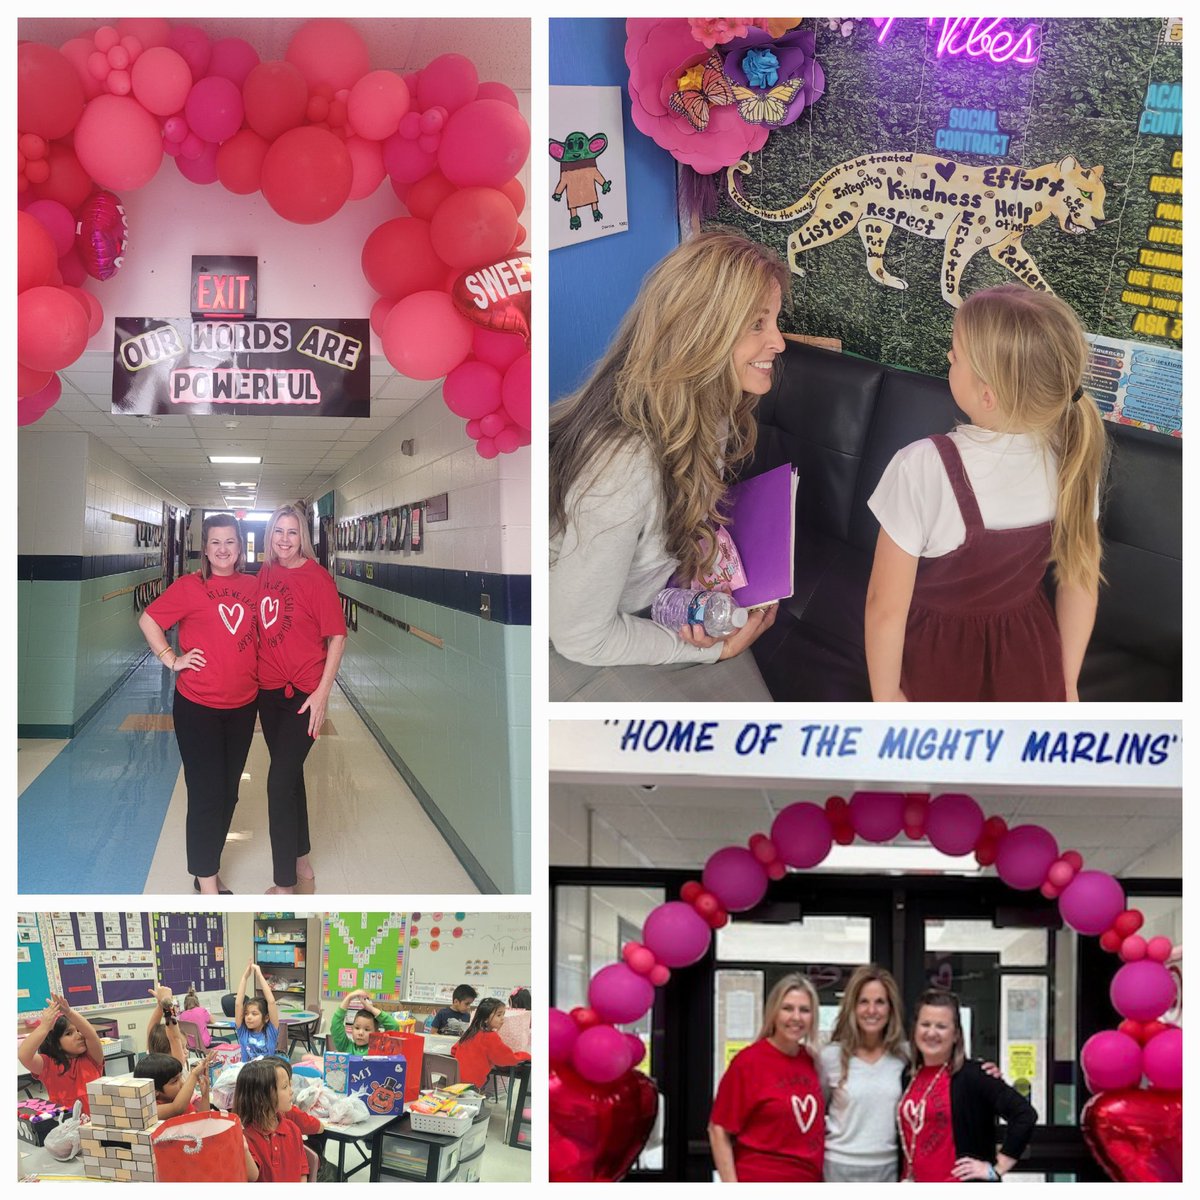 Great CKH Traction visit with Allison Olson today. She has such a beautiful heart for children!! We loved sharing our CKH spirit! Check it out.... drive.google.com/file/d/1ADk5eZ…. #CCISD #CKH